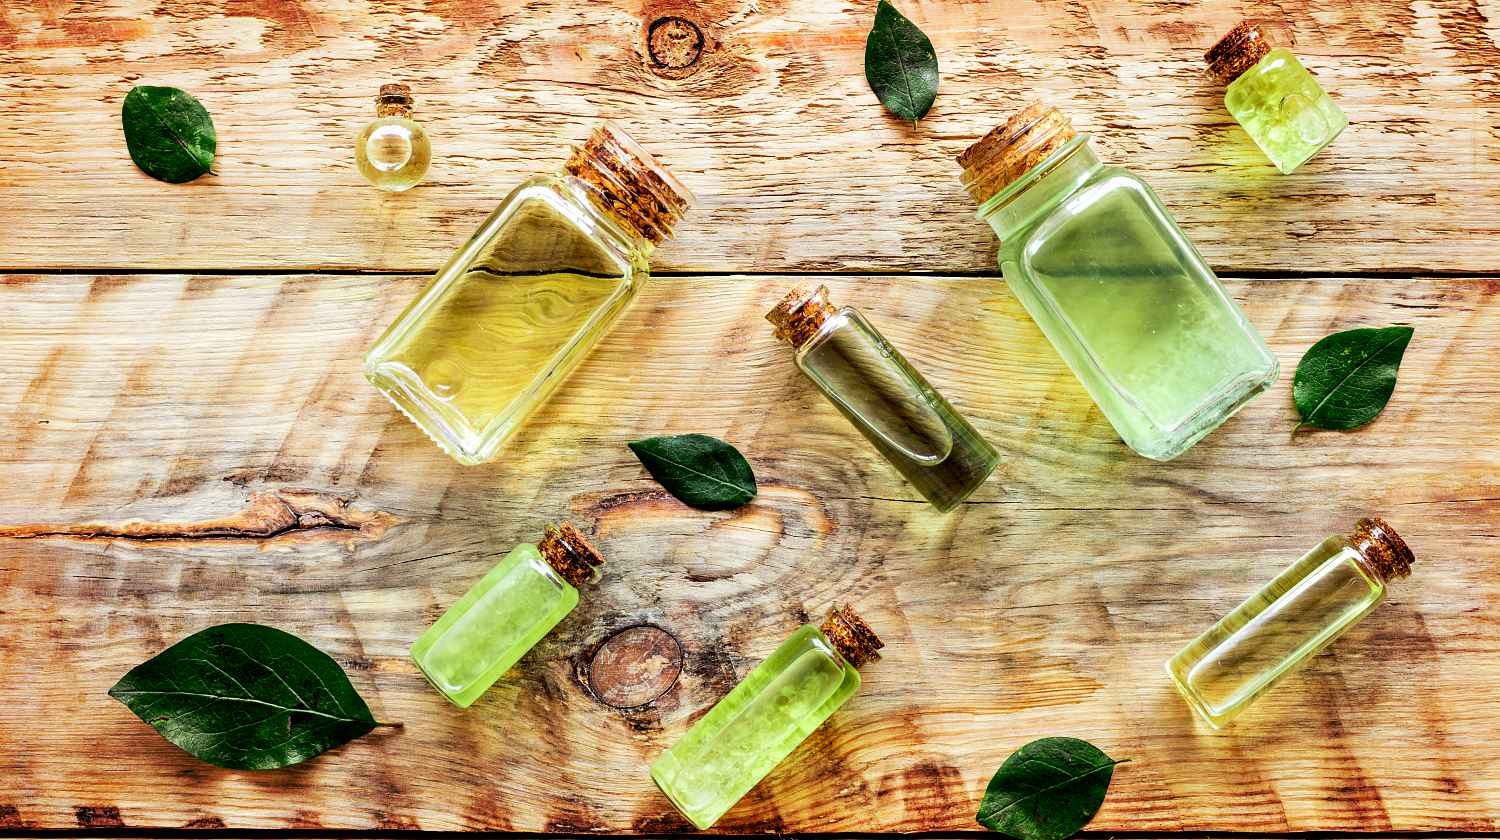 Tea tree oil in bottles on rustic wooden background | Tea Tree Oil Uses | Essential Oils For Survival | Featured